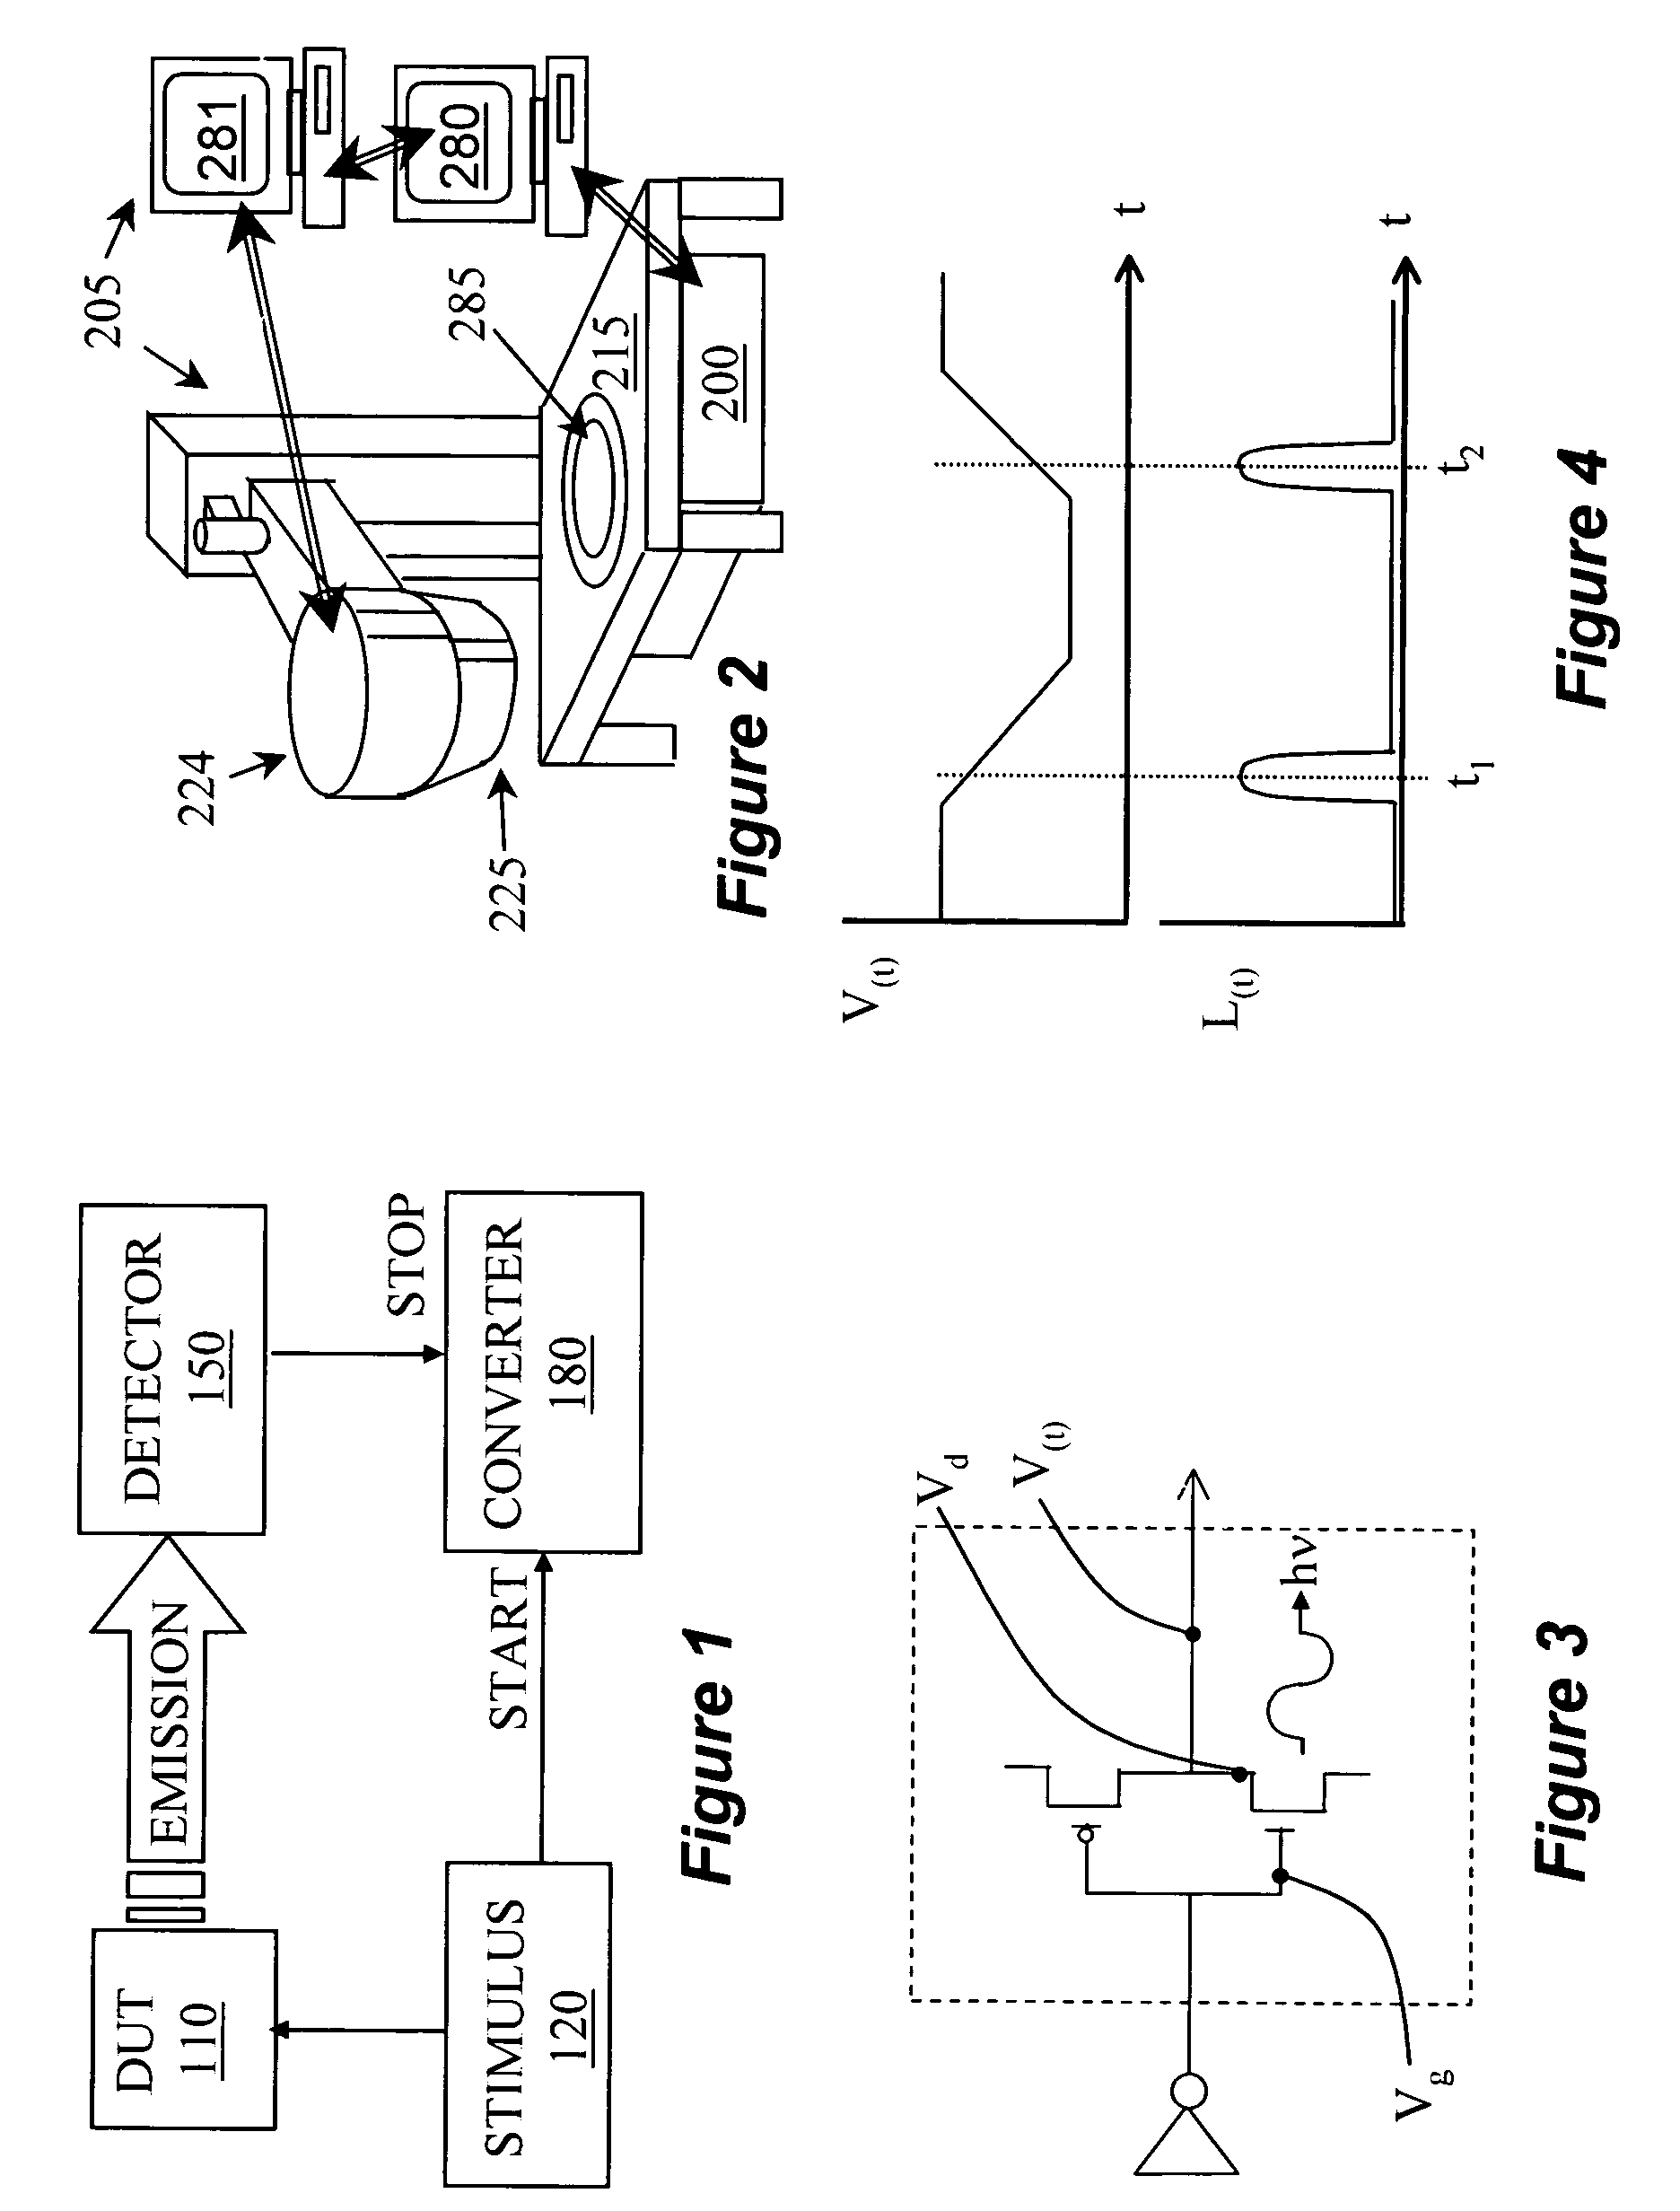 Apparatus and method for determining voltage using optical observation